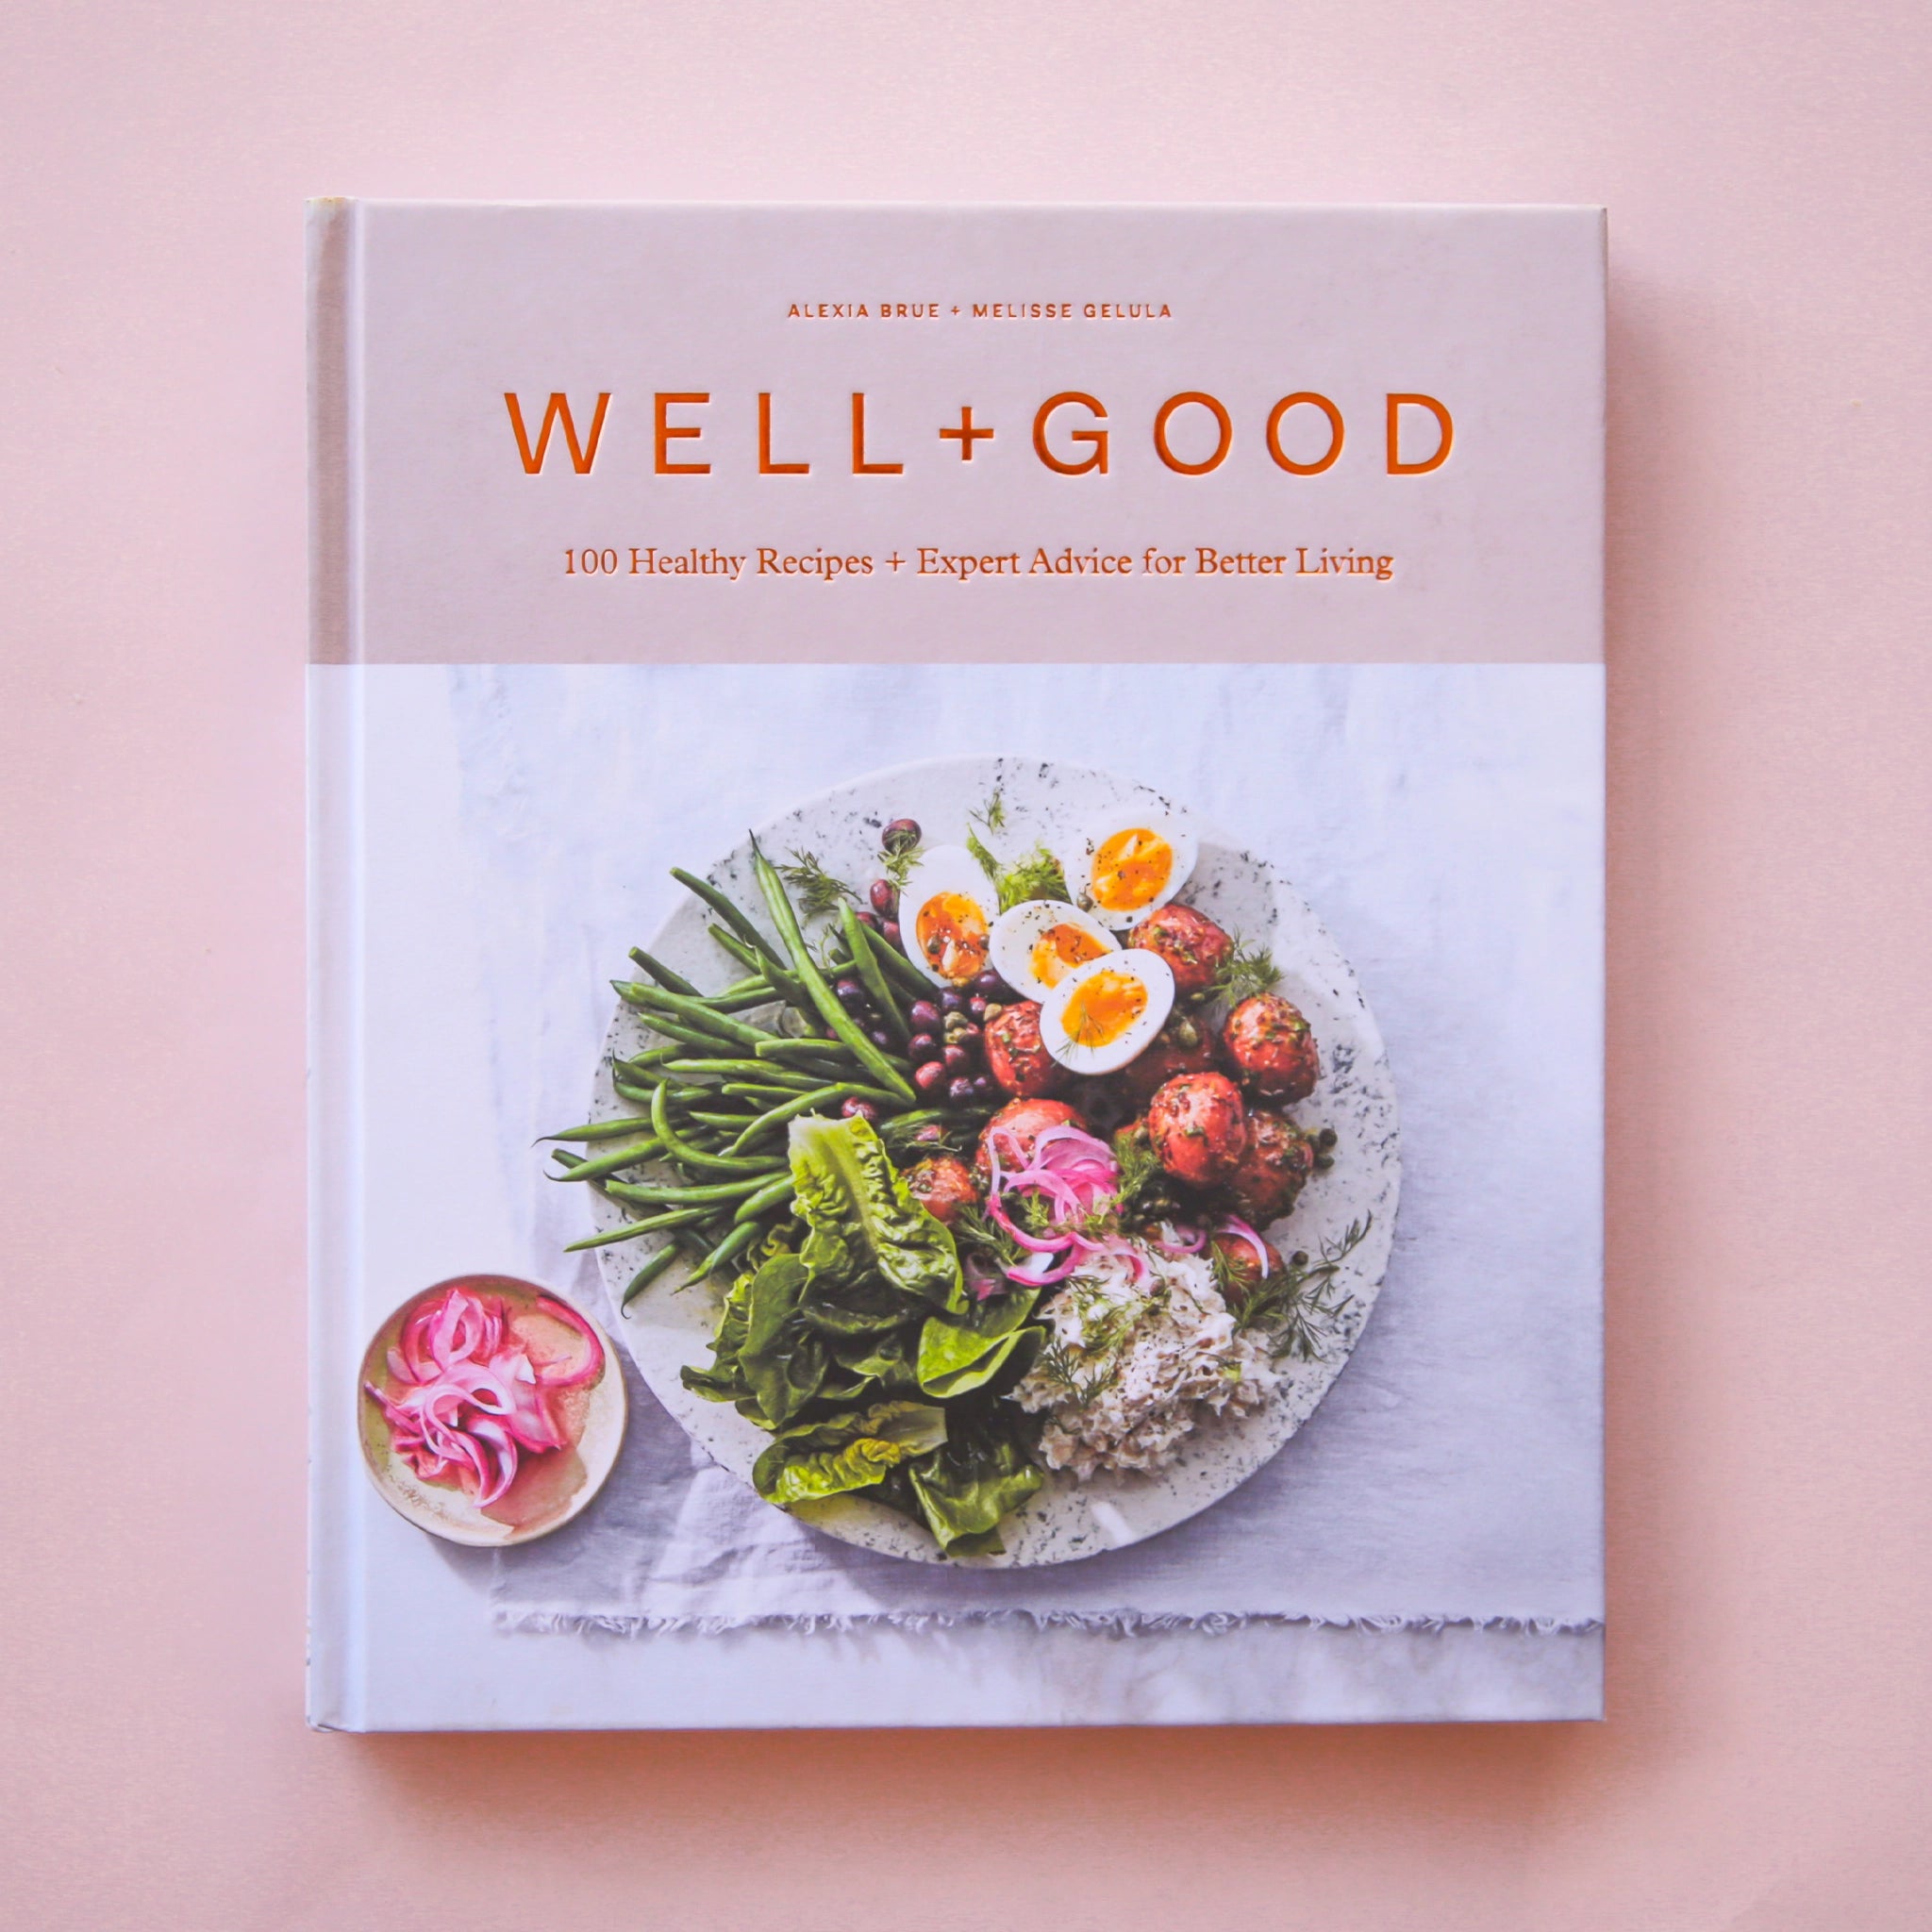 Hard cover cookbook titled &#39;Well + Good, 100 healthy recipes + expert advice for better living&#39; in gold lettering. Below the title is a beautifully plated salad of greens, eggs, rice and more.